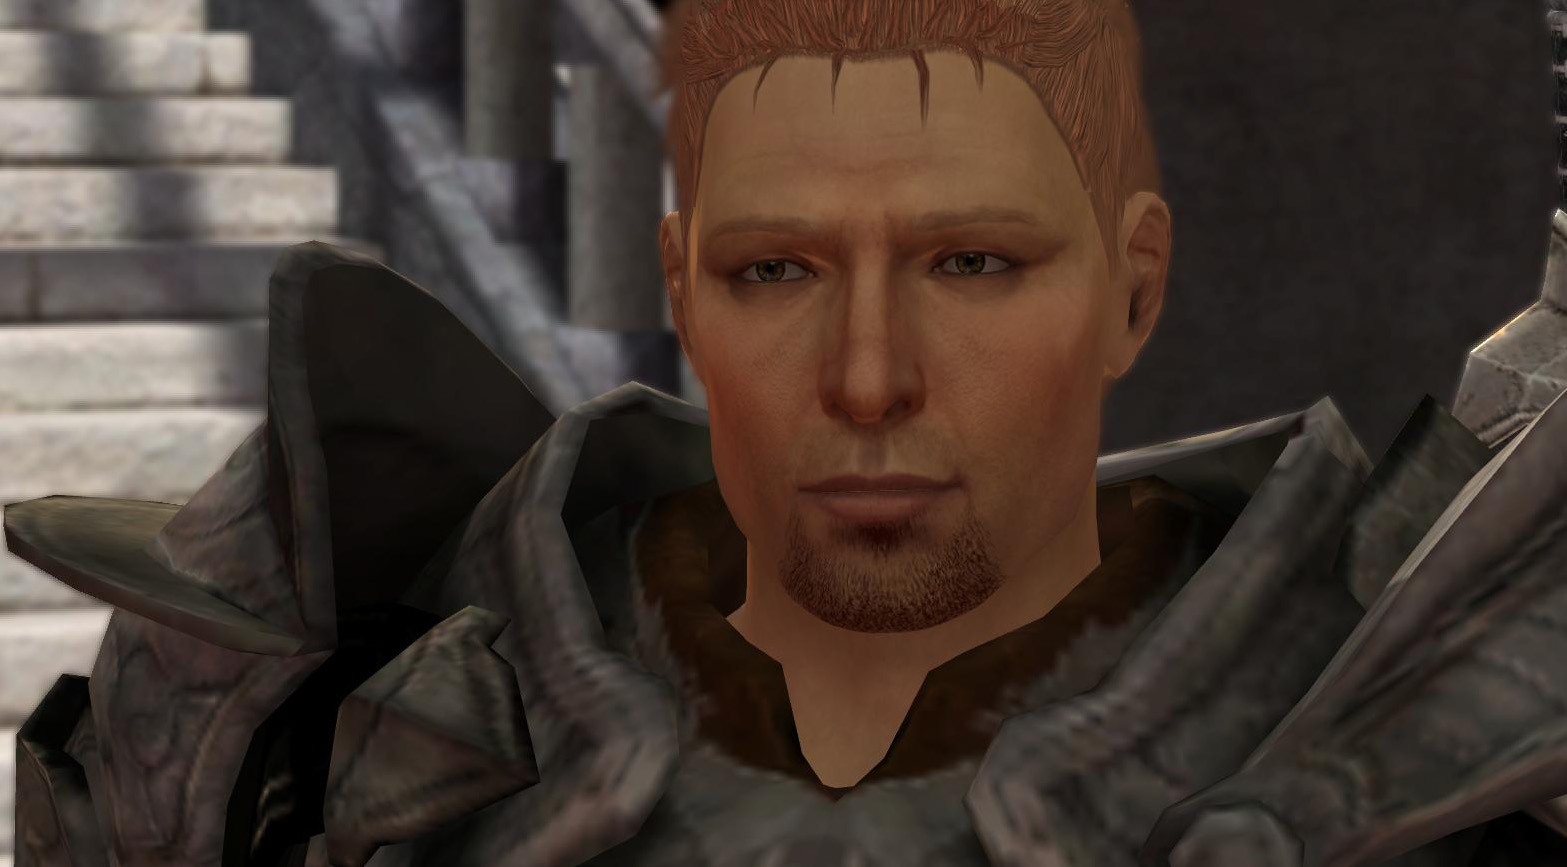 Dragon Age: Origins Alistair's reaction to gifts 